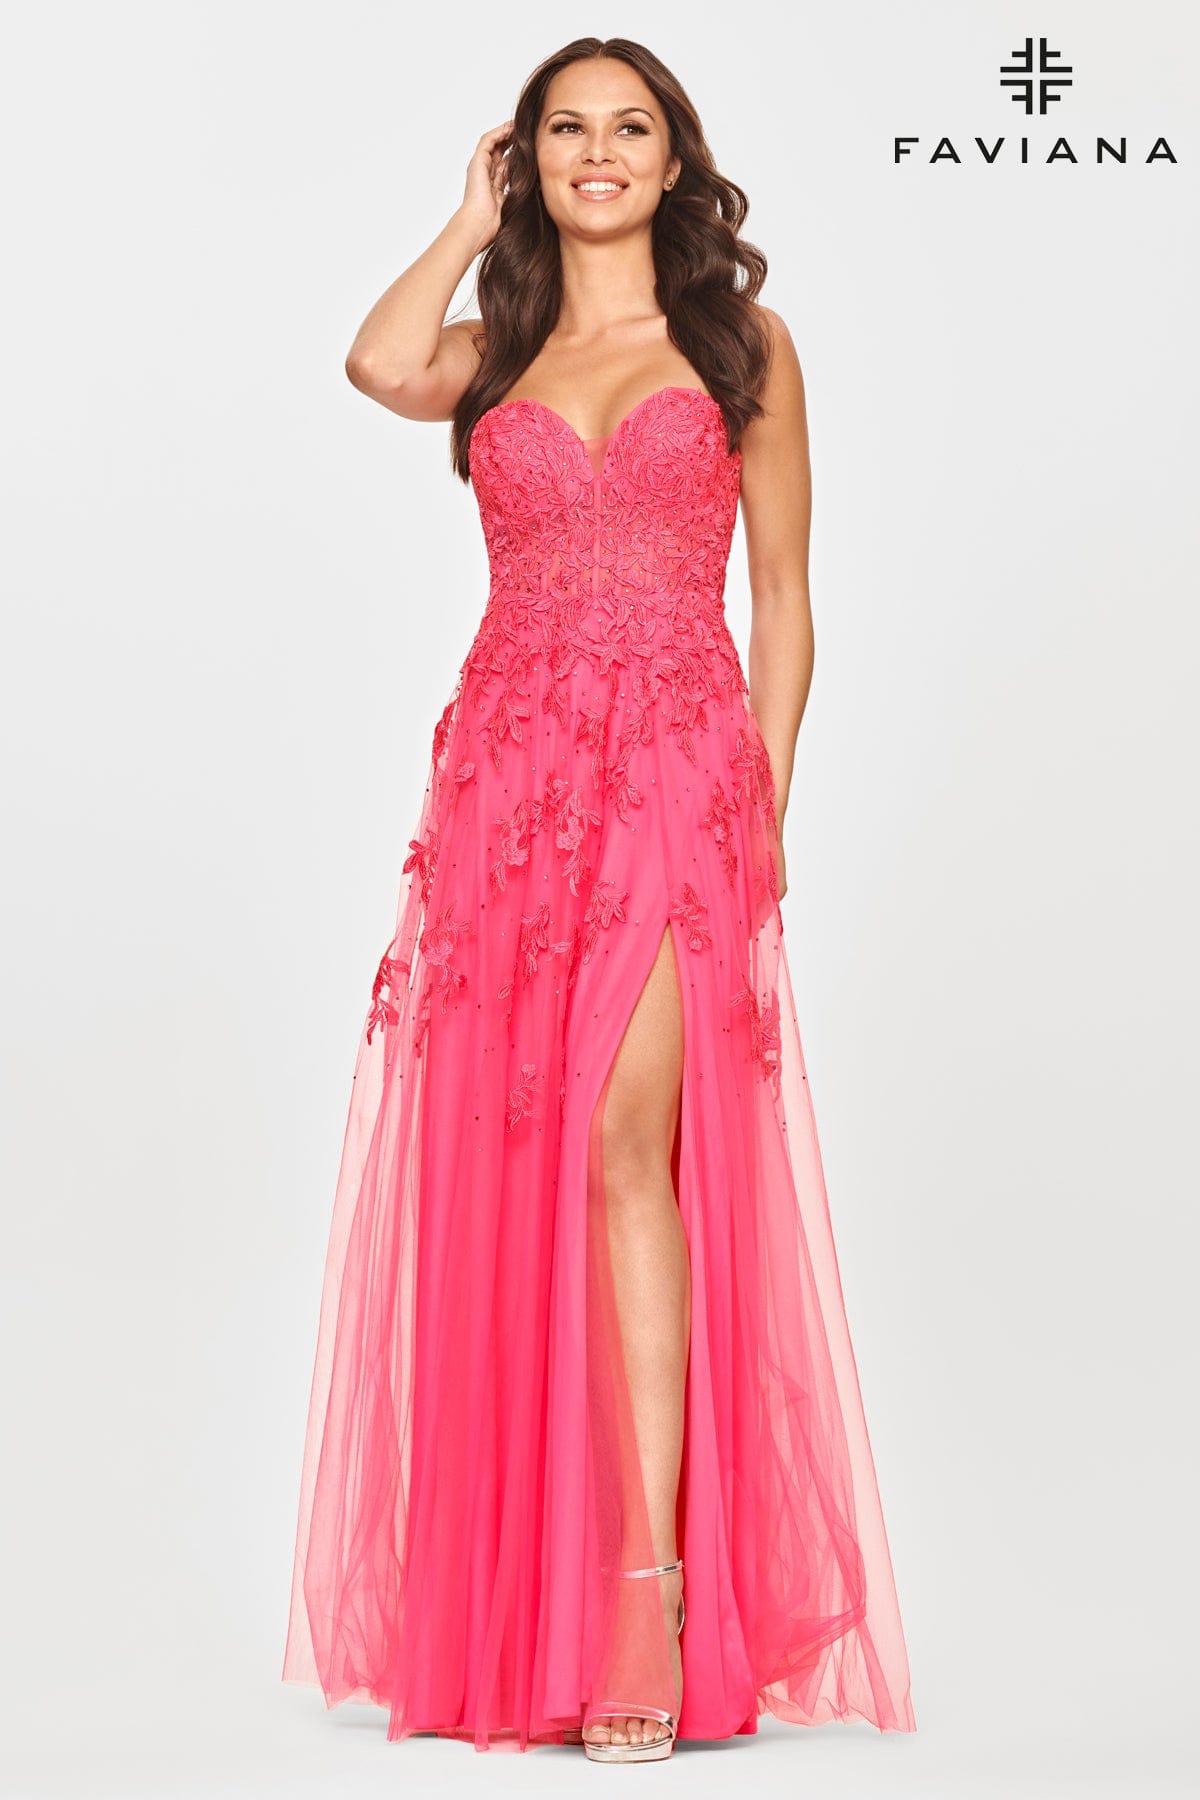 Hot Pink Long Tulle Prom Dress With Corset Bodice And Lace Applique